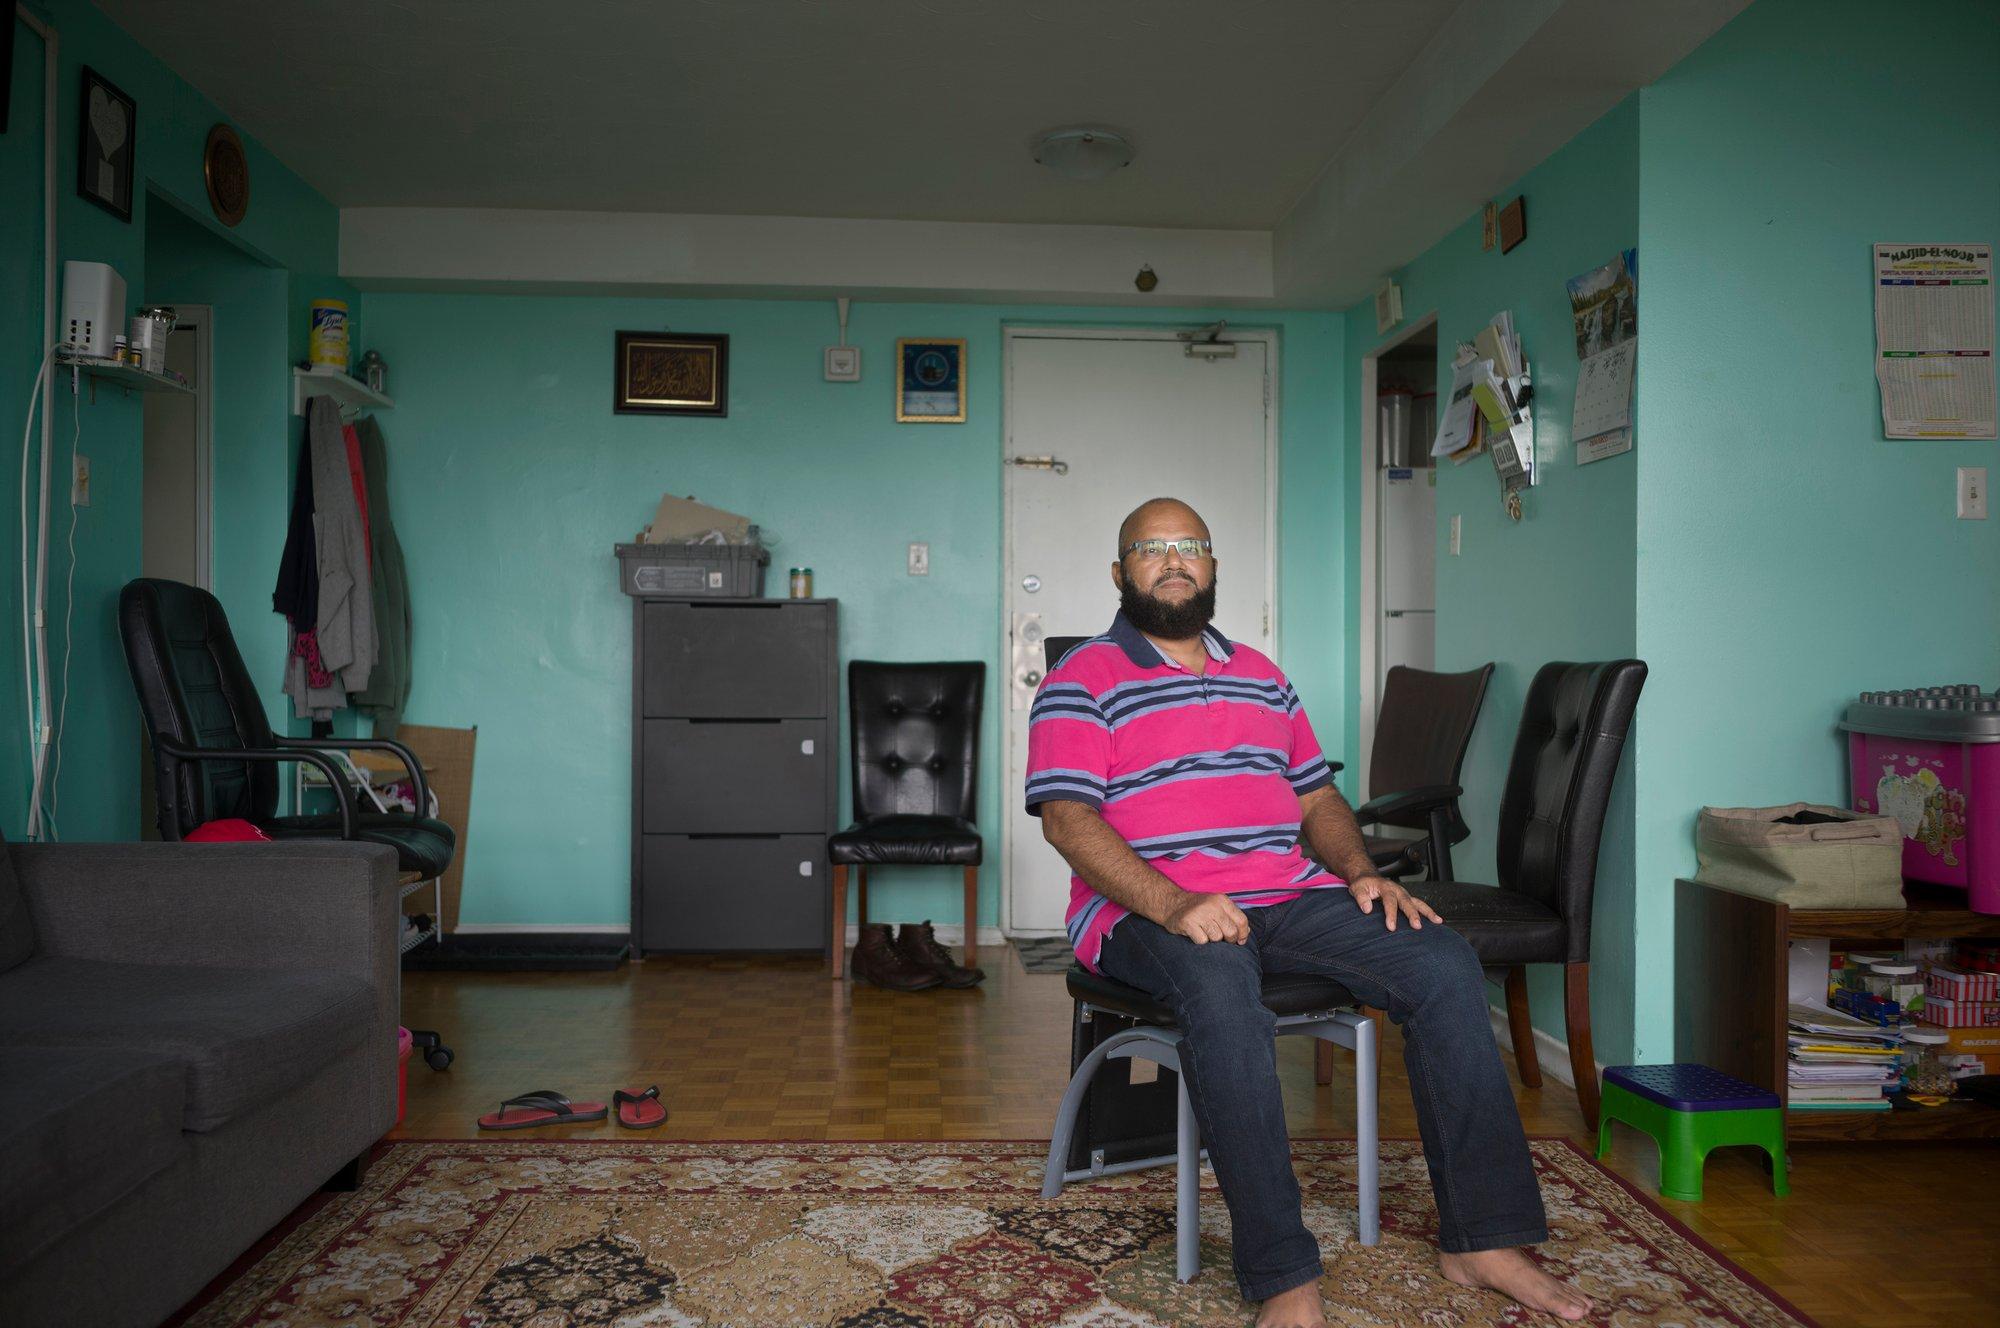 Rashid Limbada, shown here in his apartment, is among the tenants of 1440 and 1444 Lawrence Ave. W. on Toronto who have joined a rent strike. "Maintenance of my unit is at an all-time low, and my family canât afford to leave,â Limbada says. (Photograph by Ian Willms)